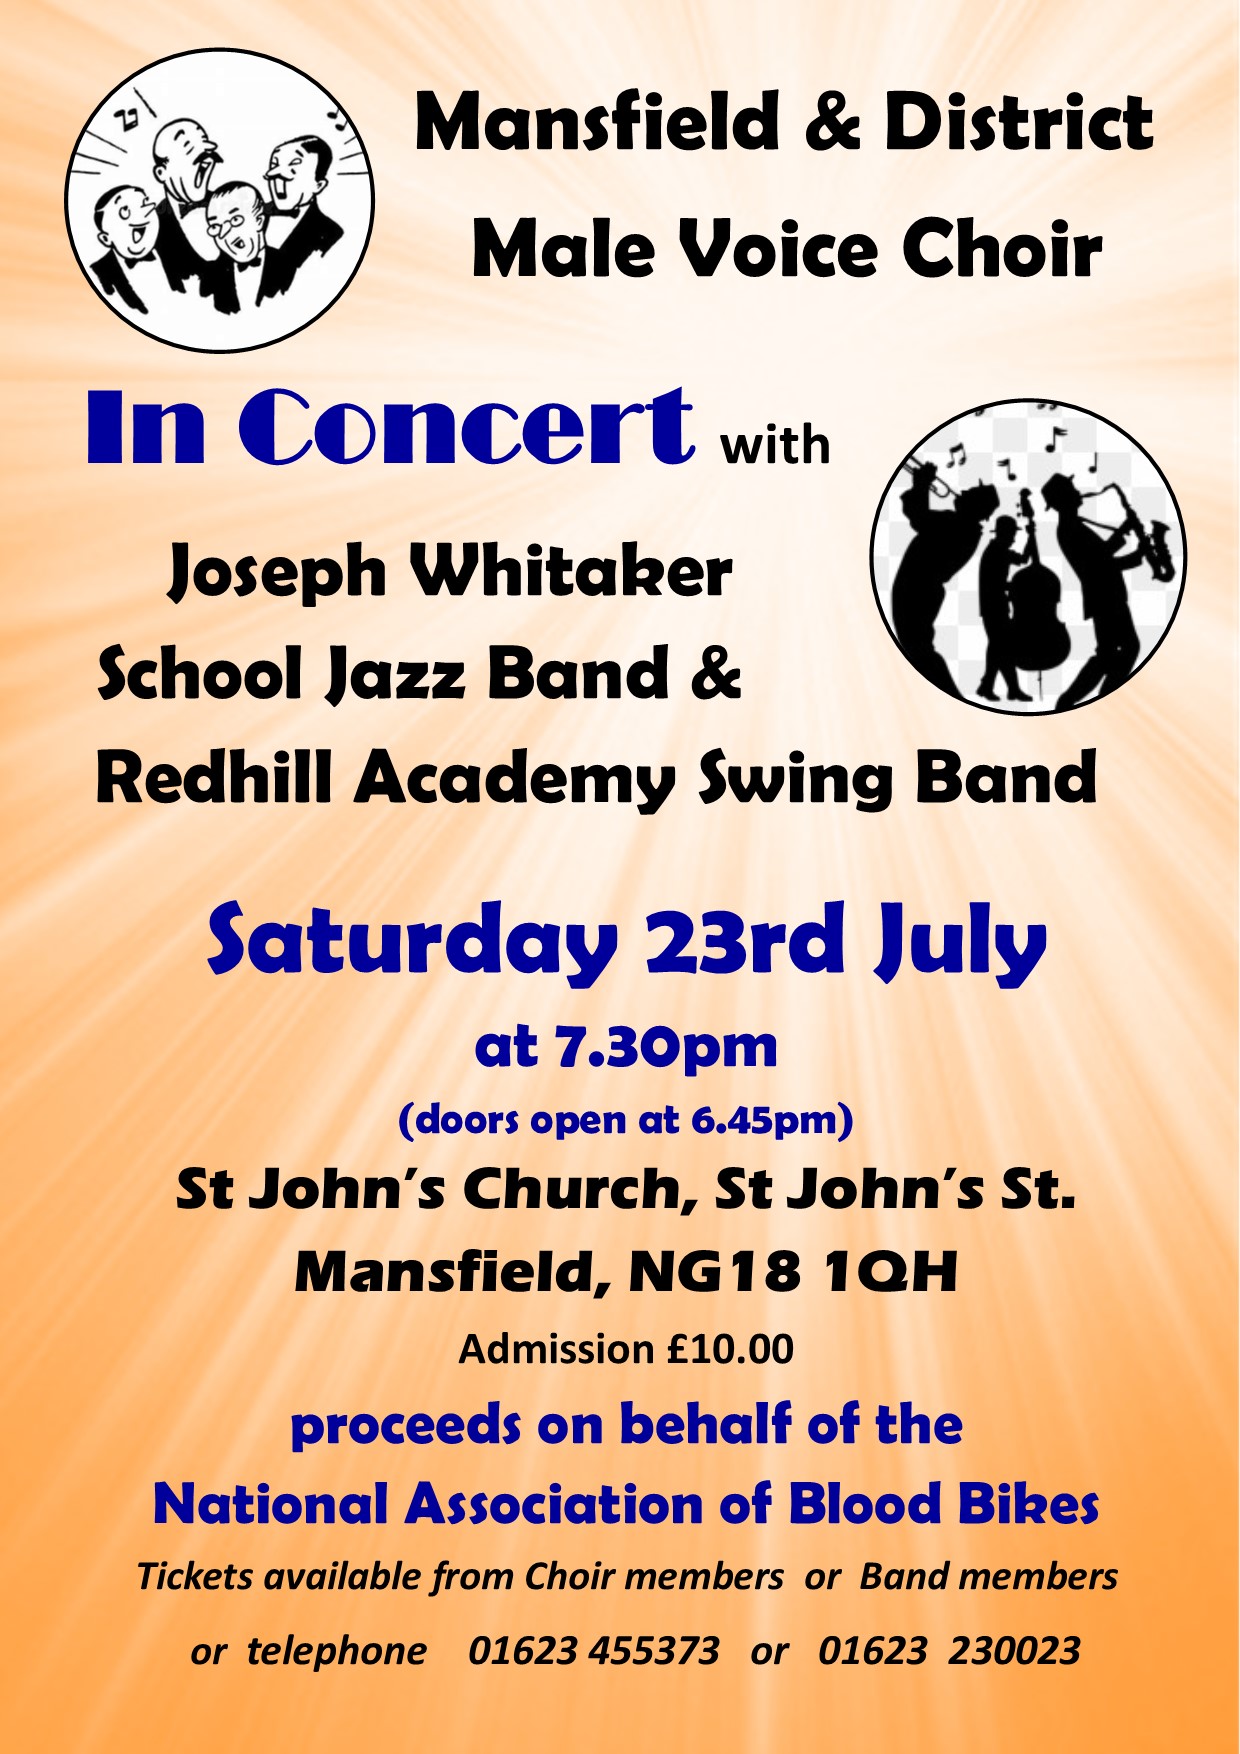 St Joins with Joseph Whitaker Concert on Saturday 23rd July at 7:30px at St Johns Church, Mansfield, NG18 1GH